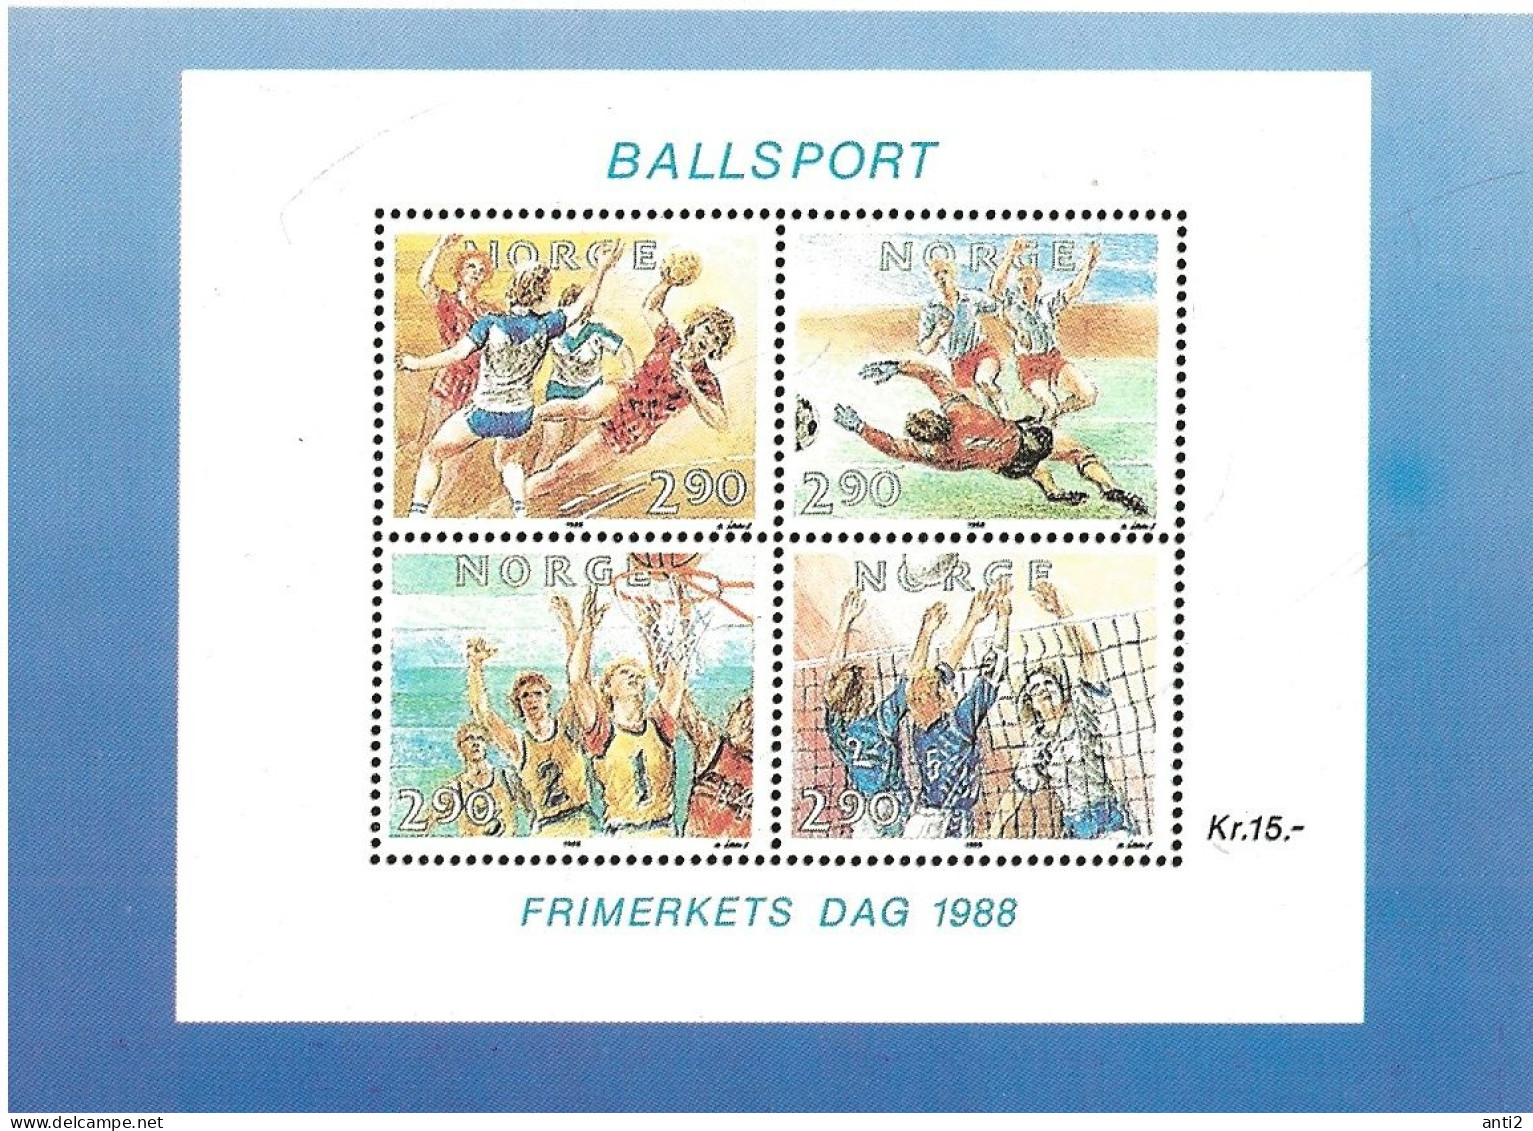 Norway 1988 Card With Imprinted Stamps Stamps Day  - Bloc Ballsports,  Maximum Card  Unused - Brieven En Documenten